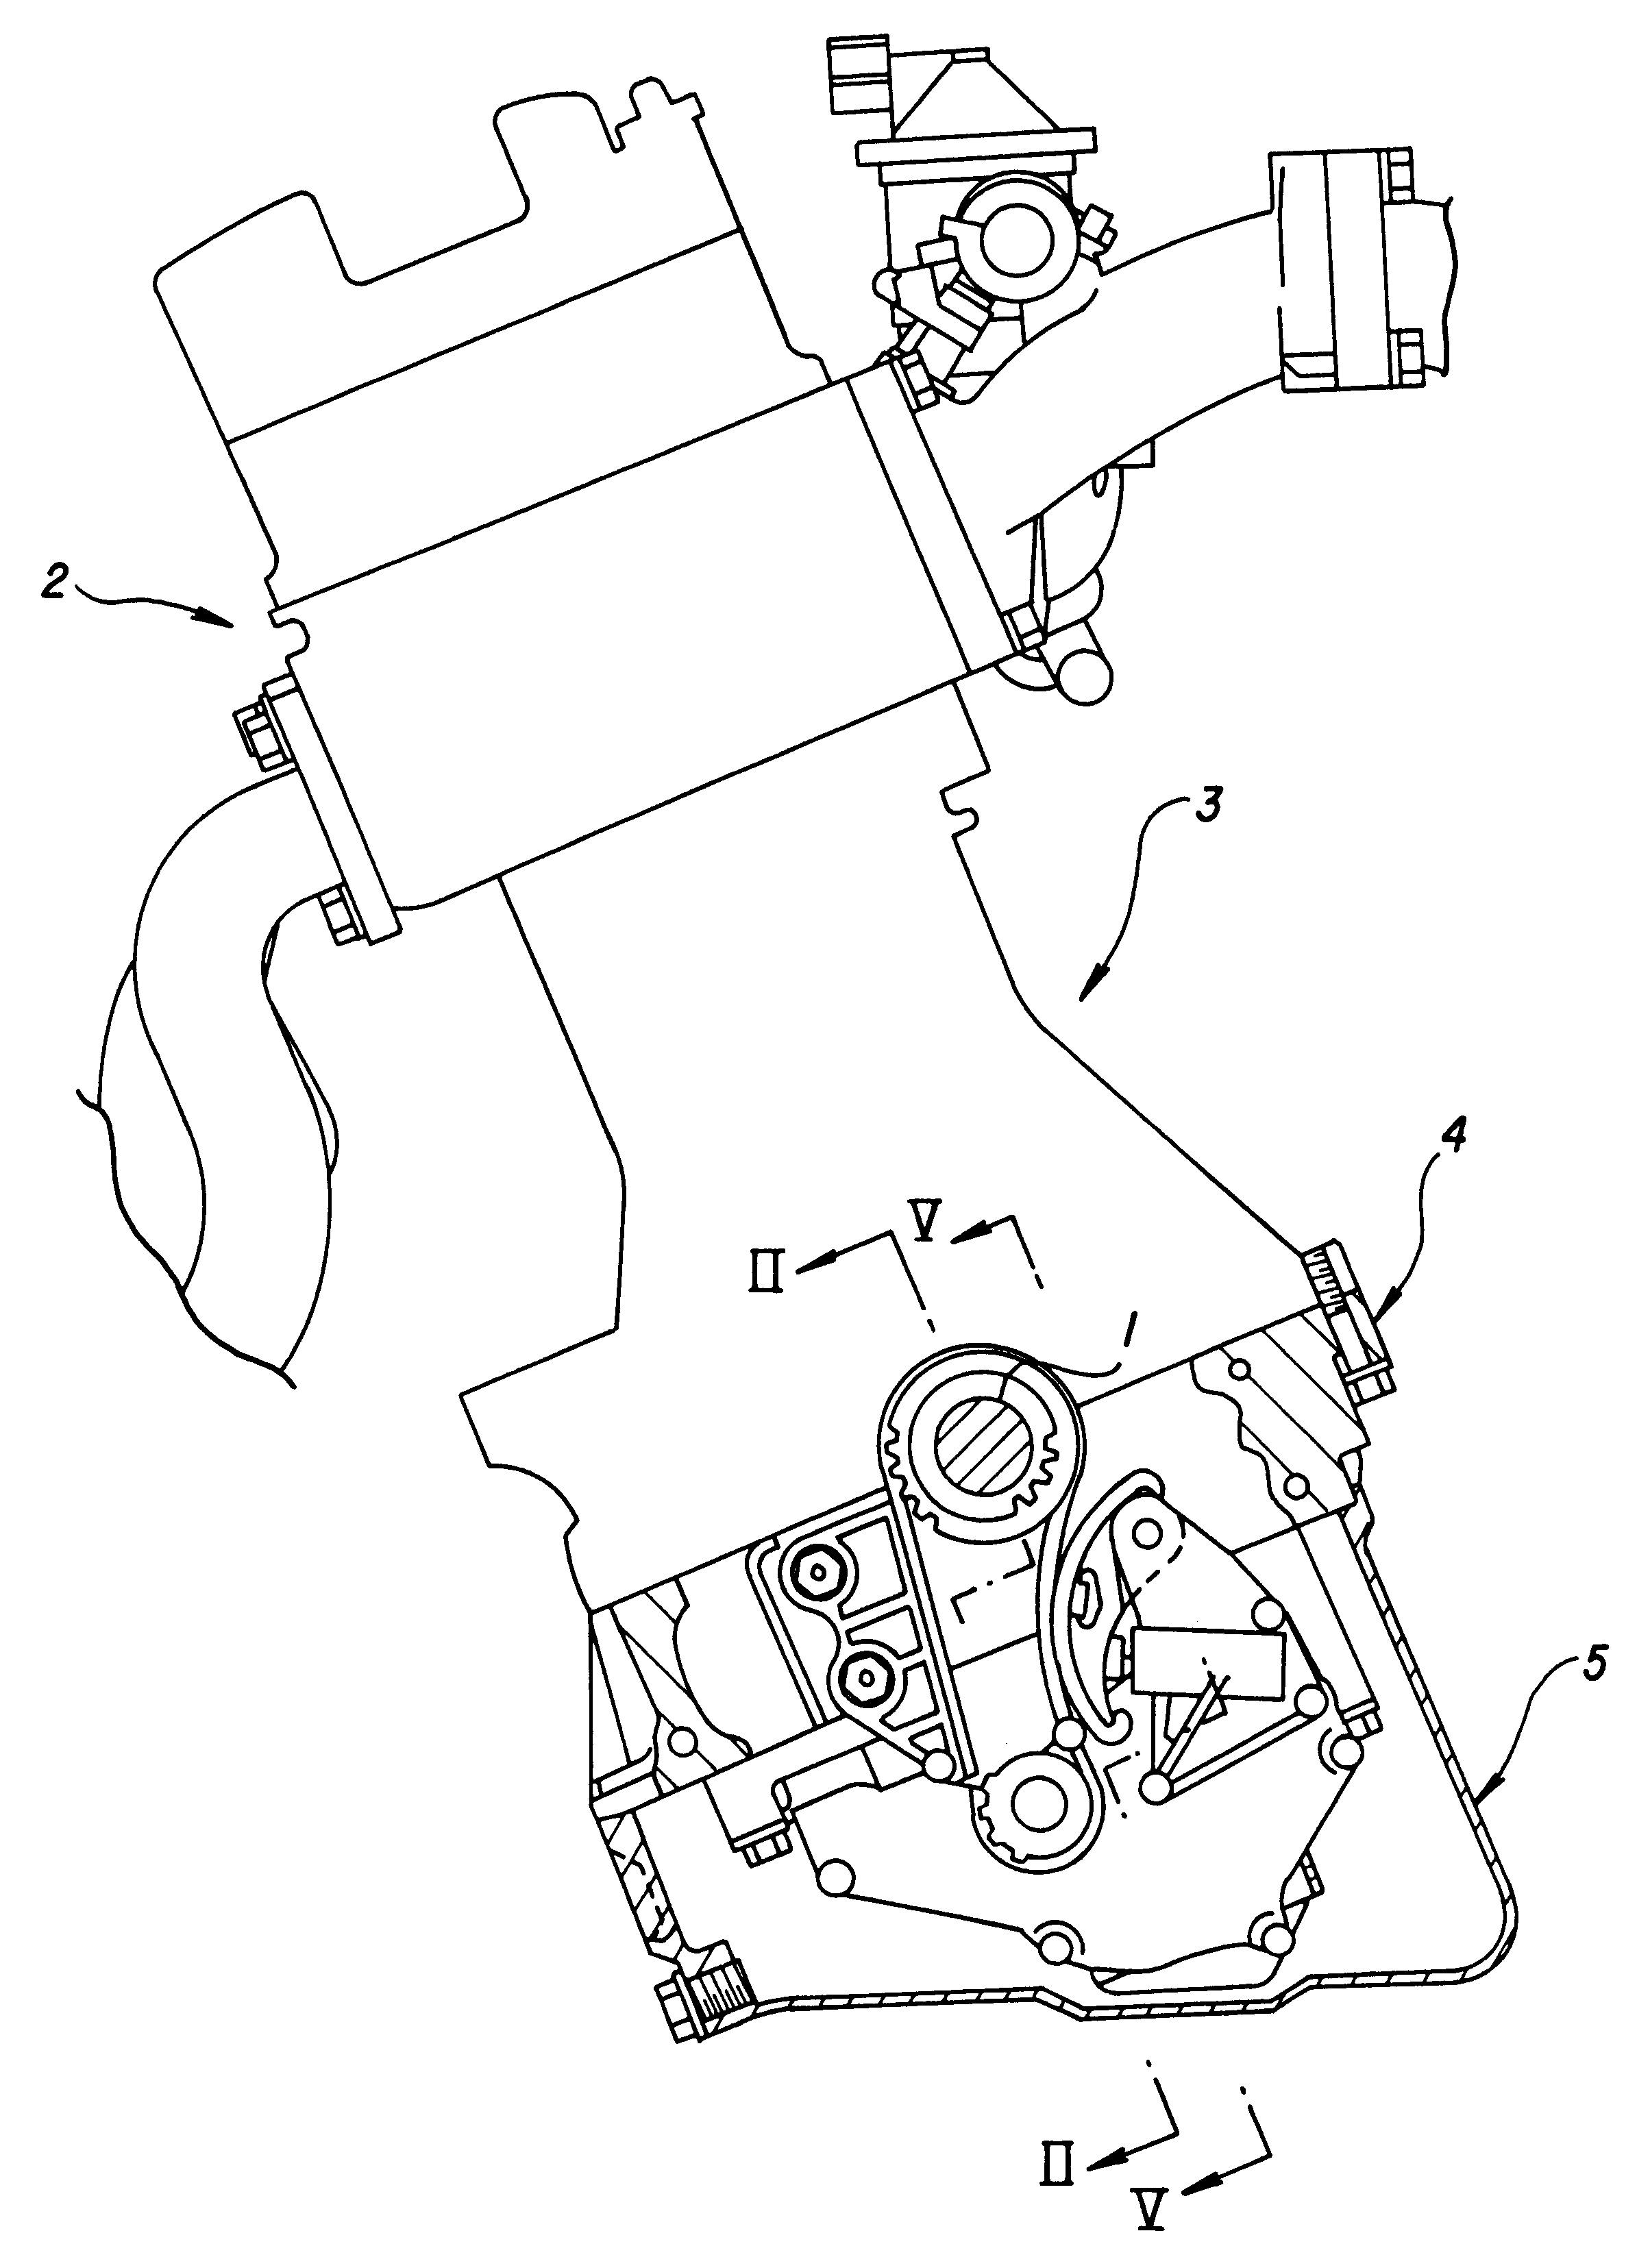 Engine balance shafts supporting structure